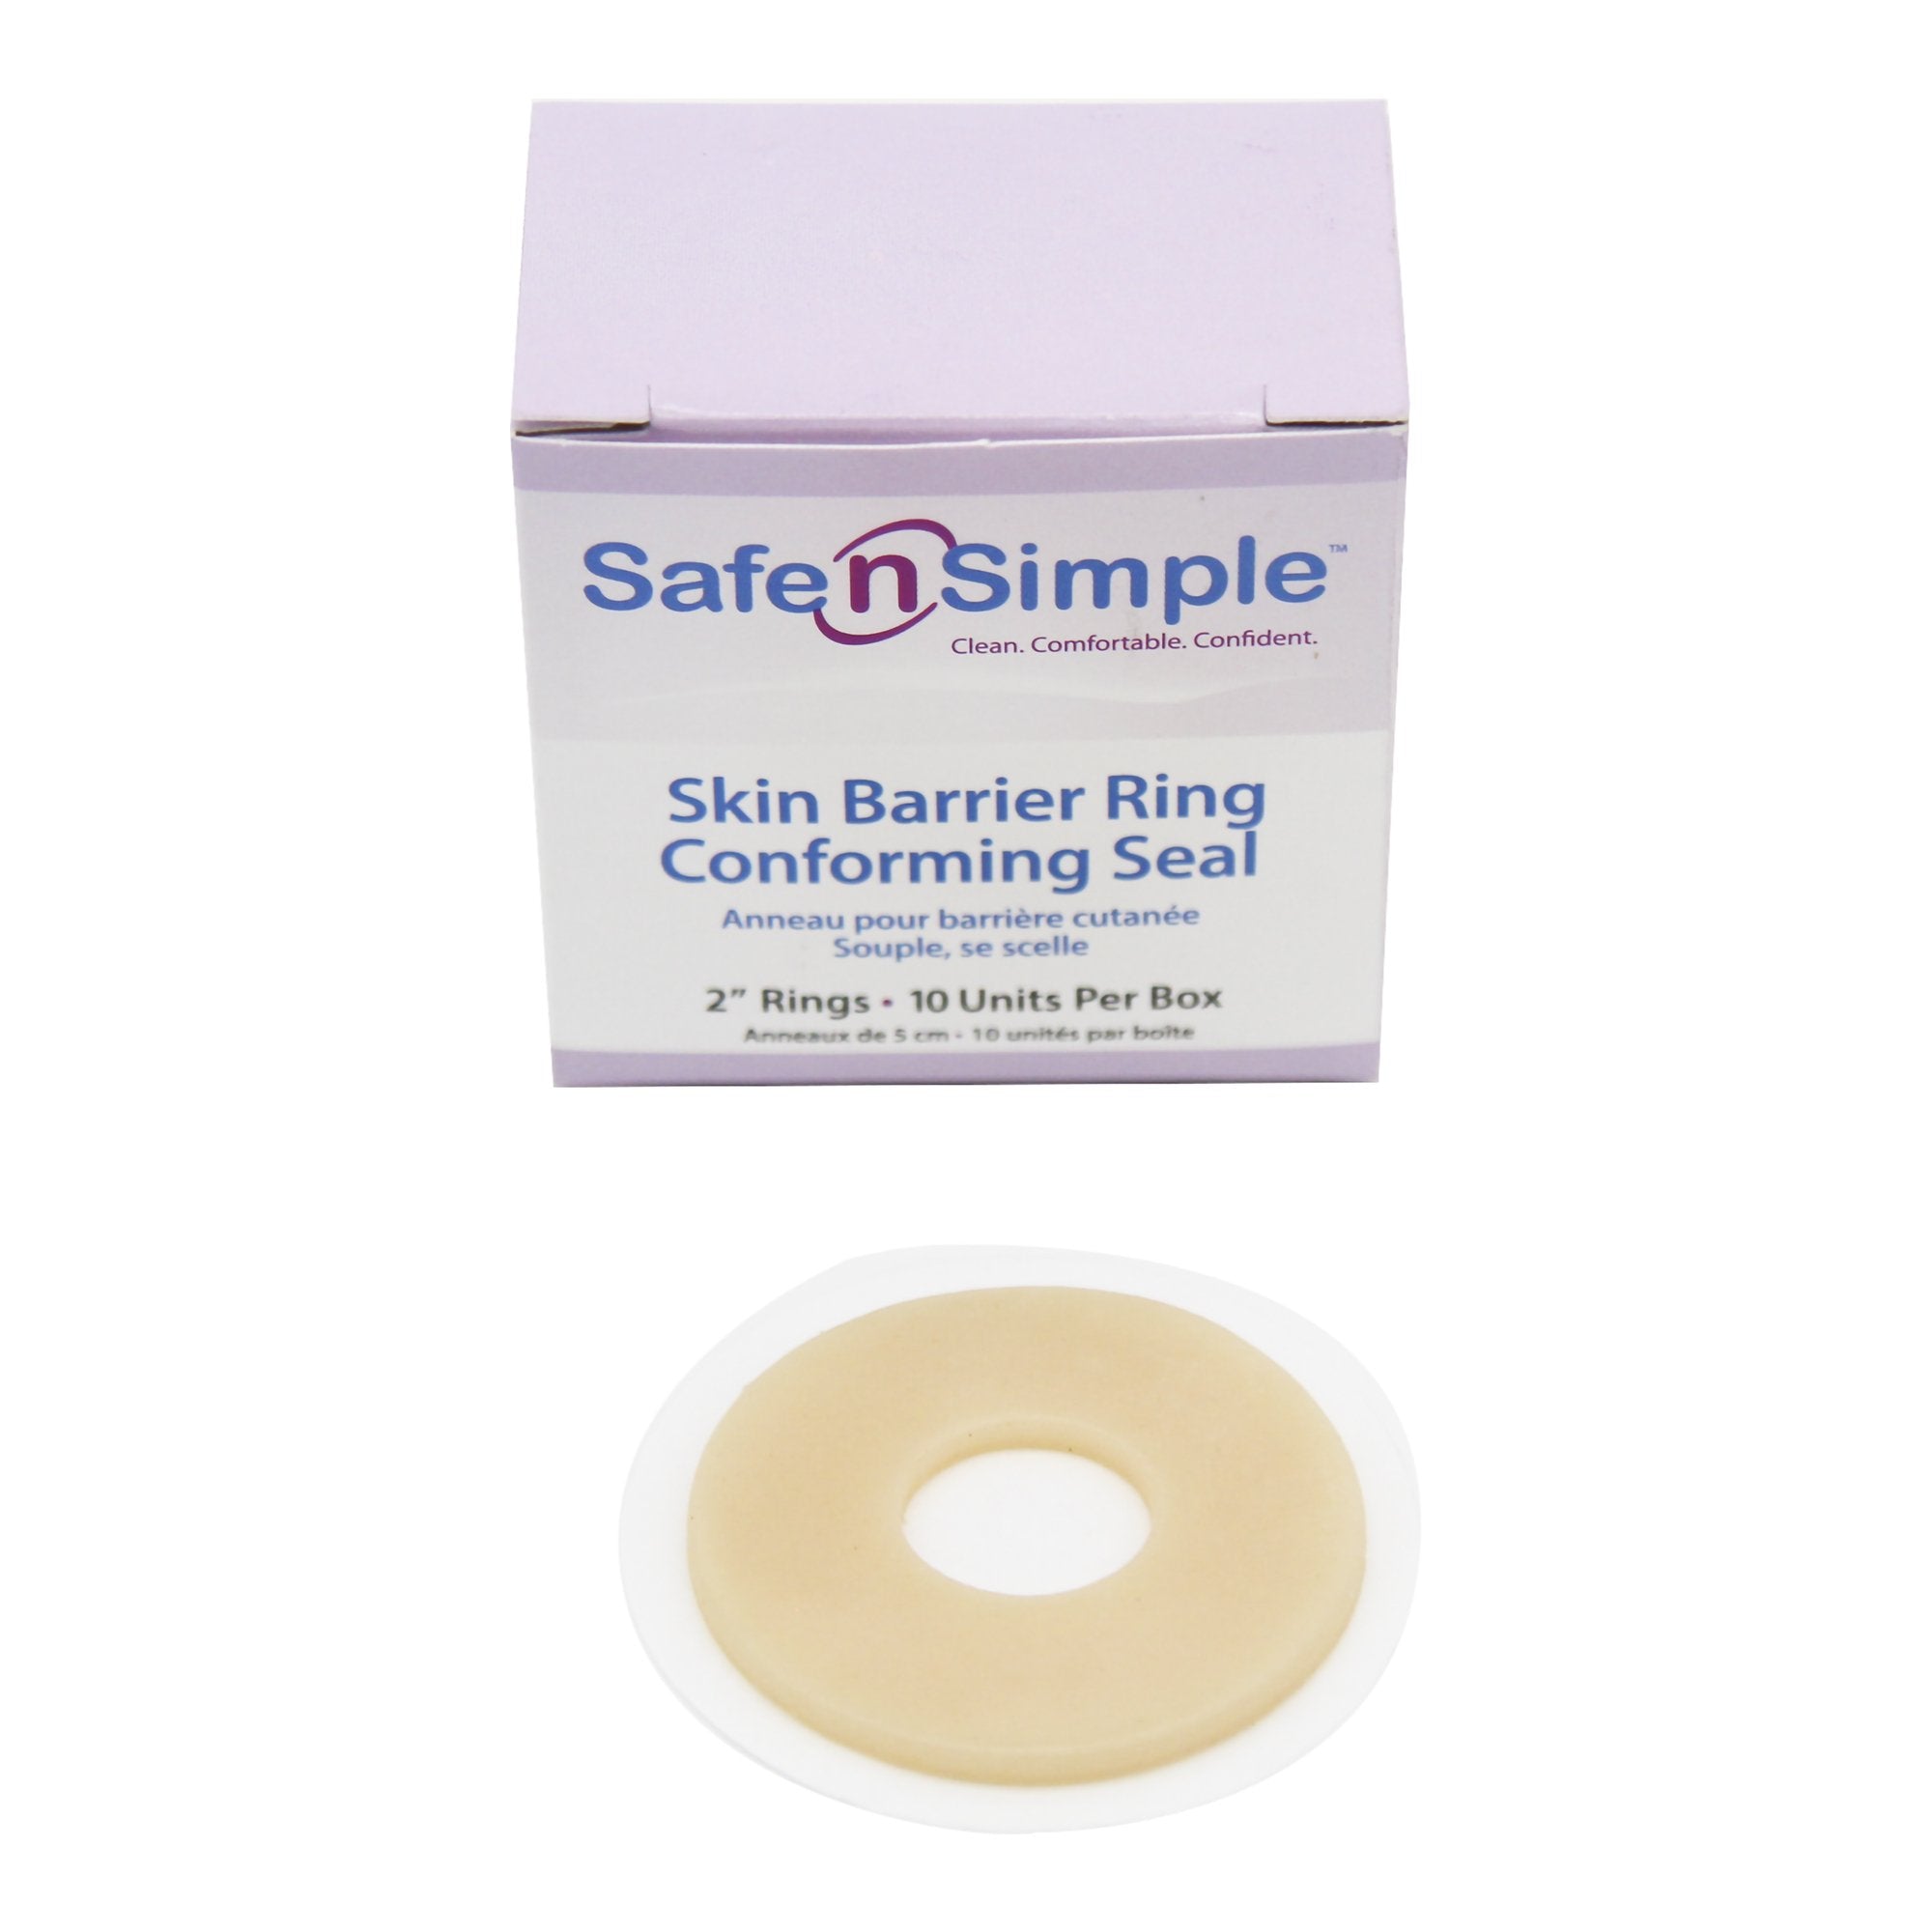 Skin Barrier Ring Safe-n'Simple Moldable, Standard Wear Adhesive without Tape Without Flange Universal System Hydrocolloid 2 Inch Diameter